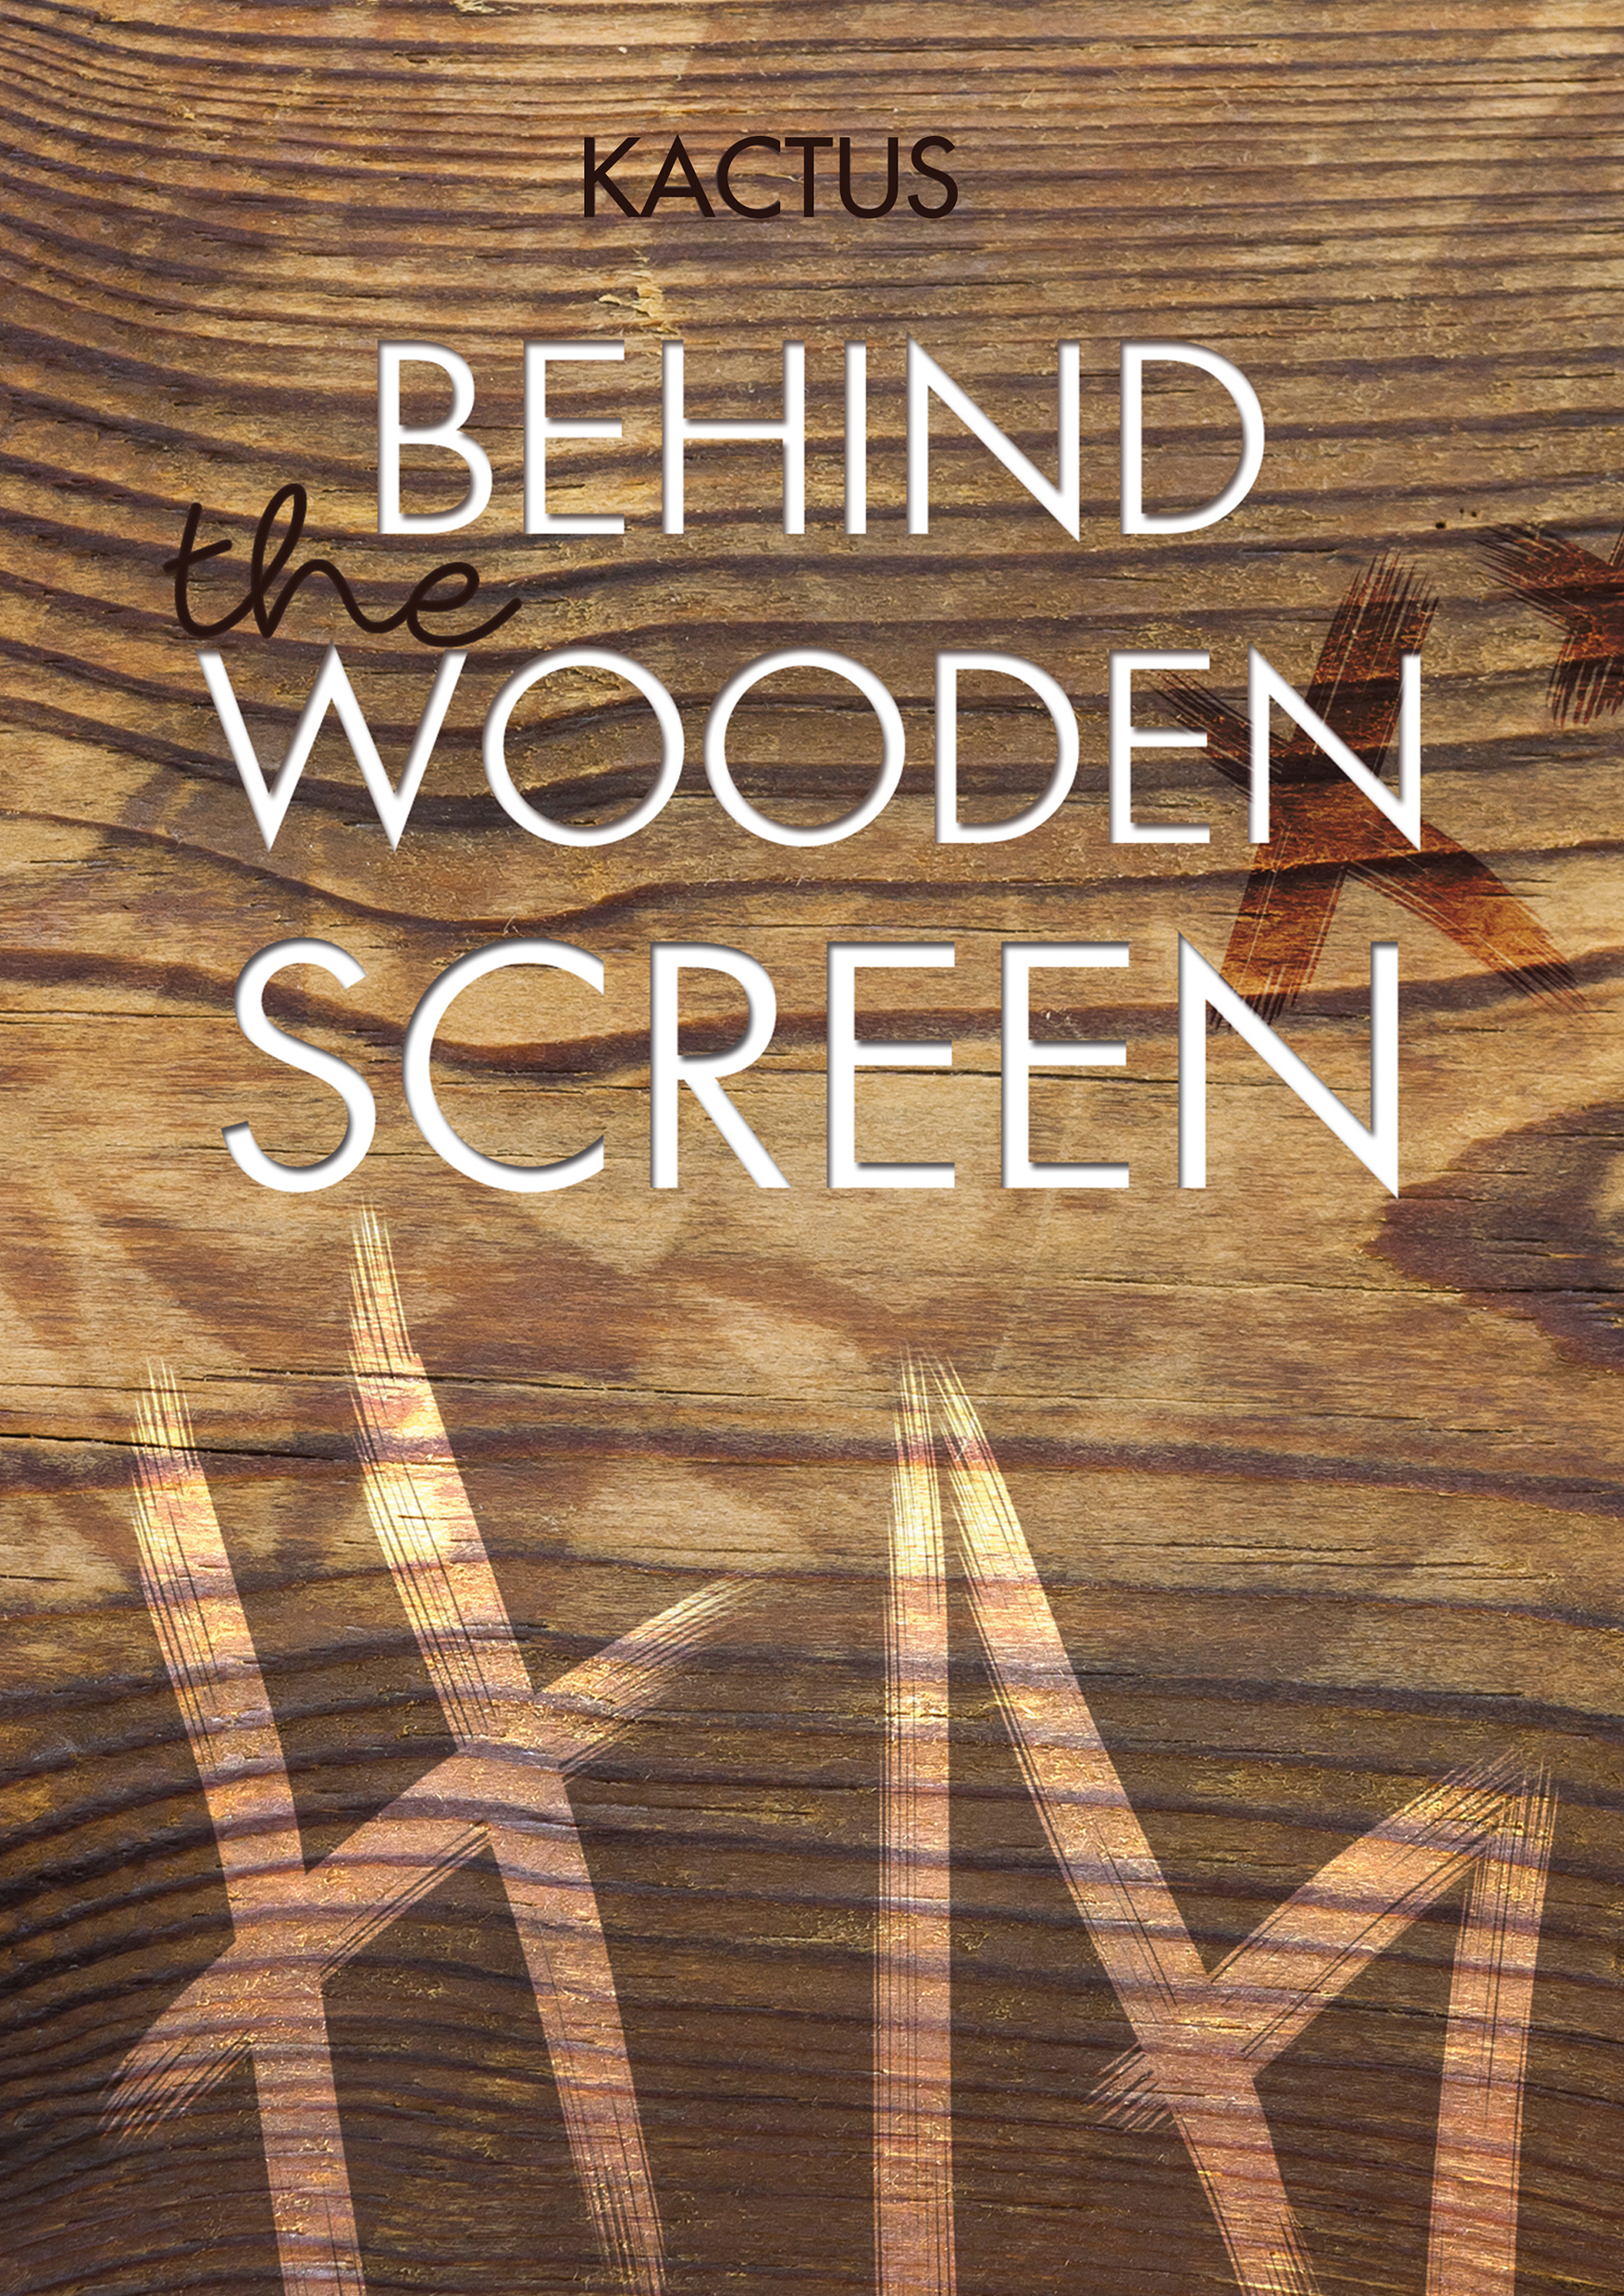 Behind the wooden screen